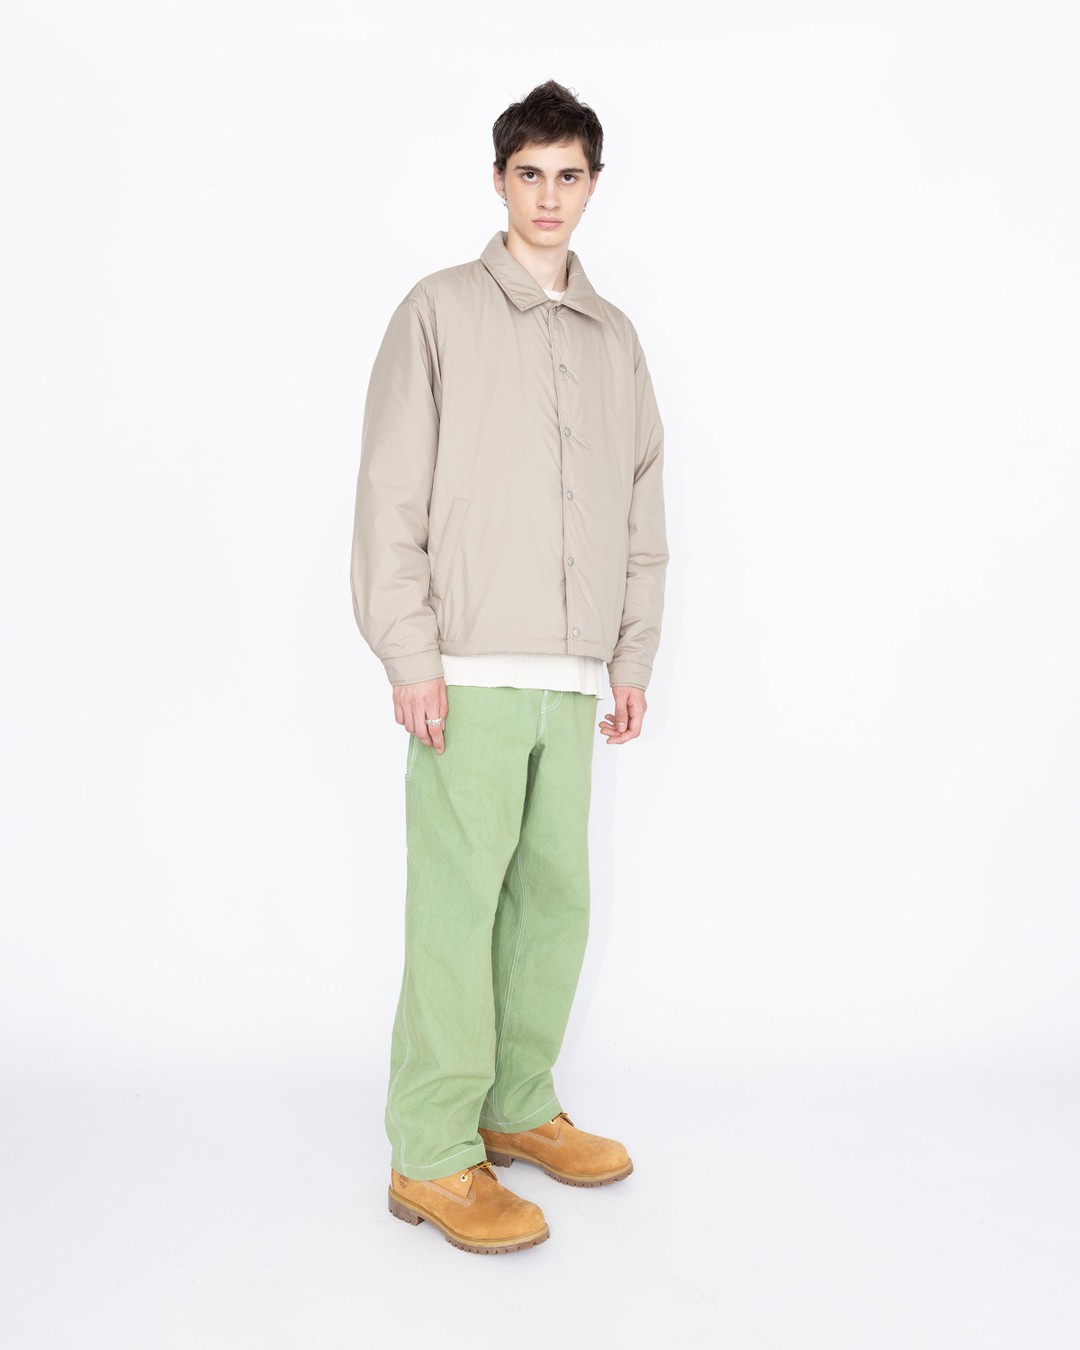 Highsnobiety HS05 – Light Insulated Eco-Poly Jacket Beige - Outerwear - Beige - Image 4